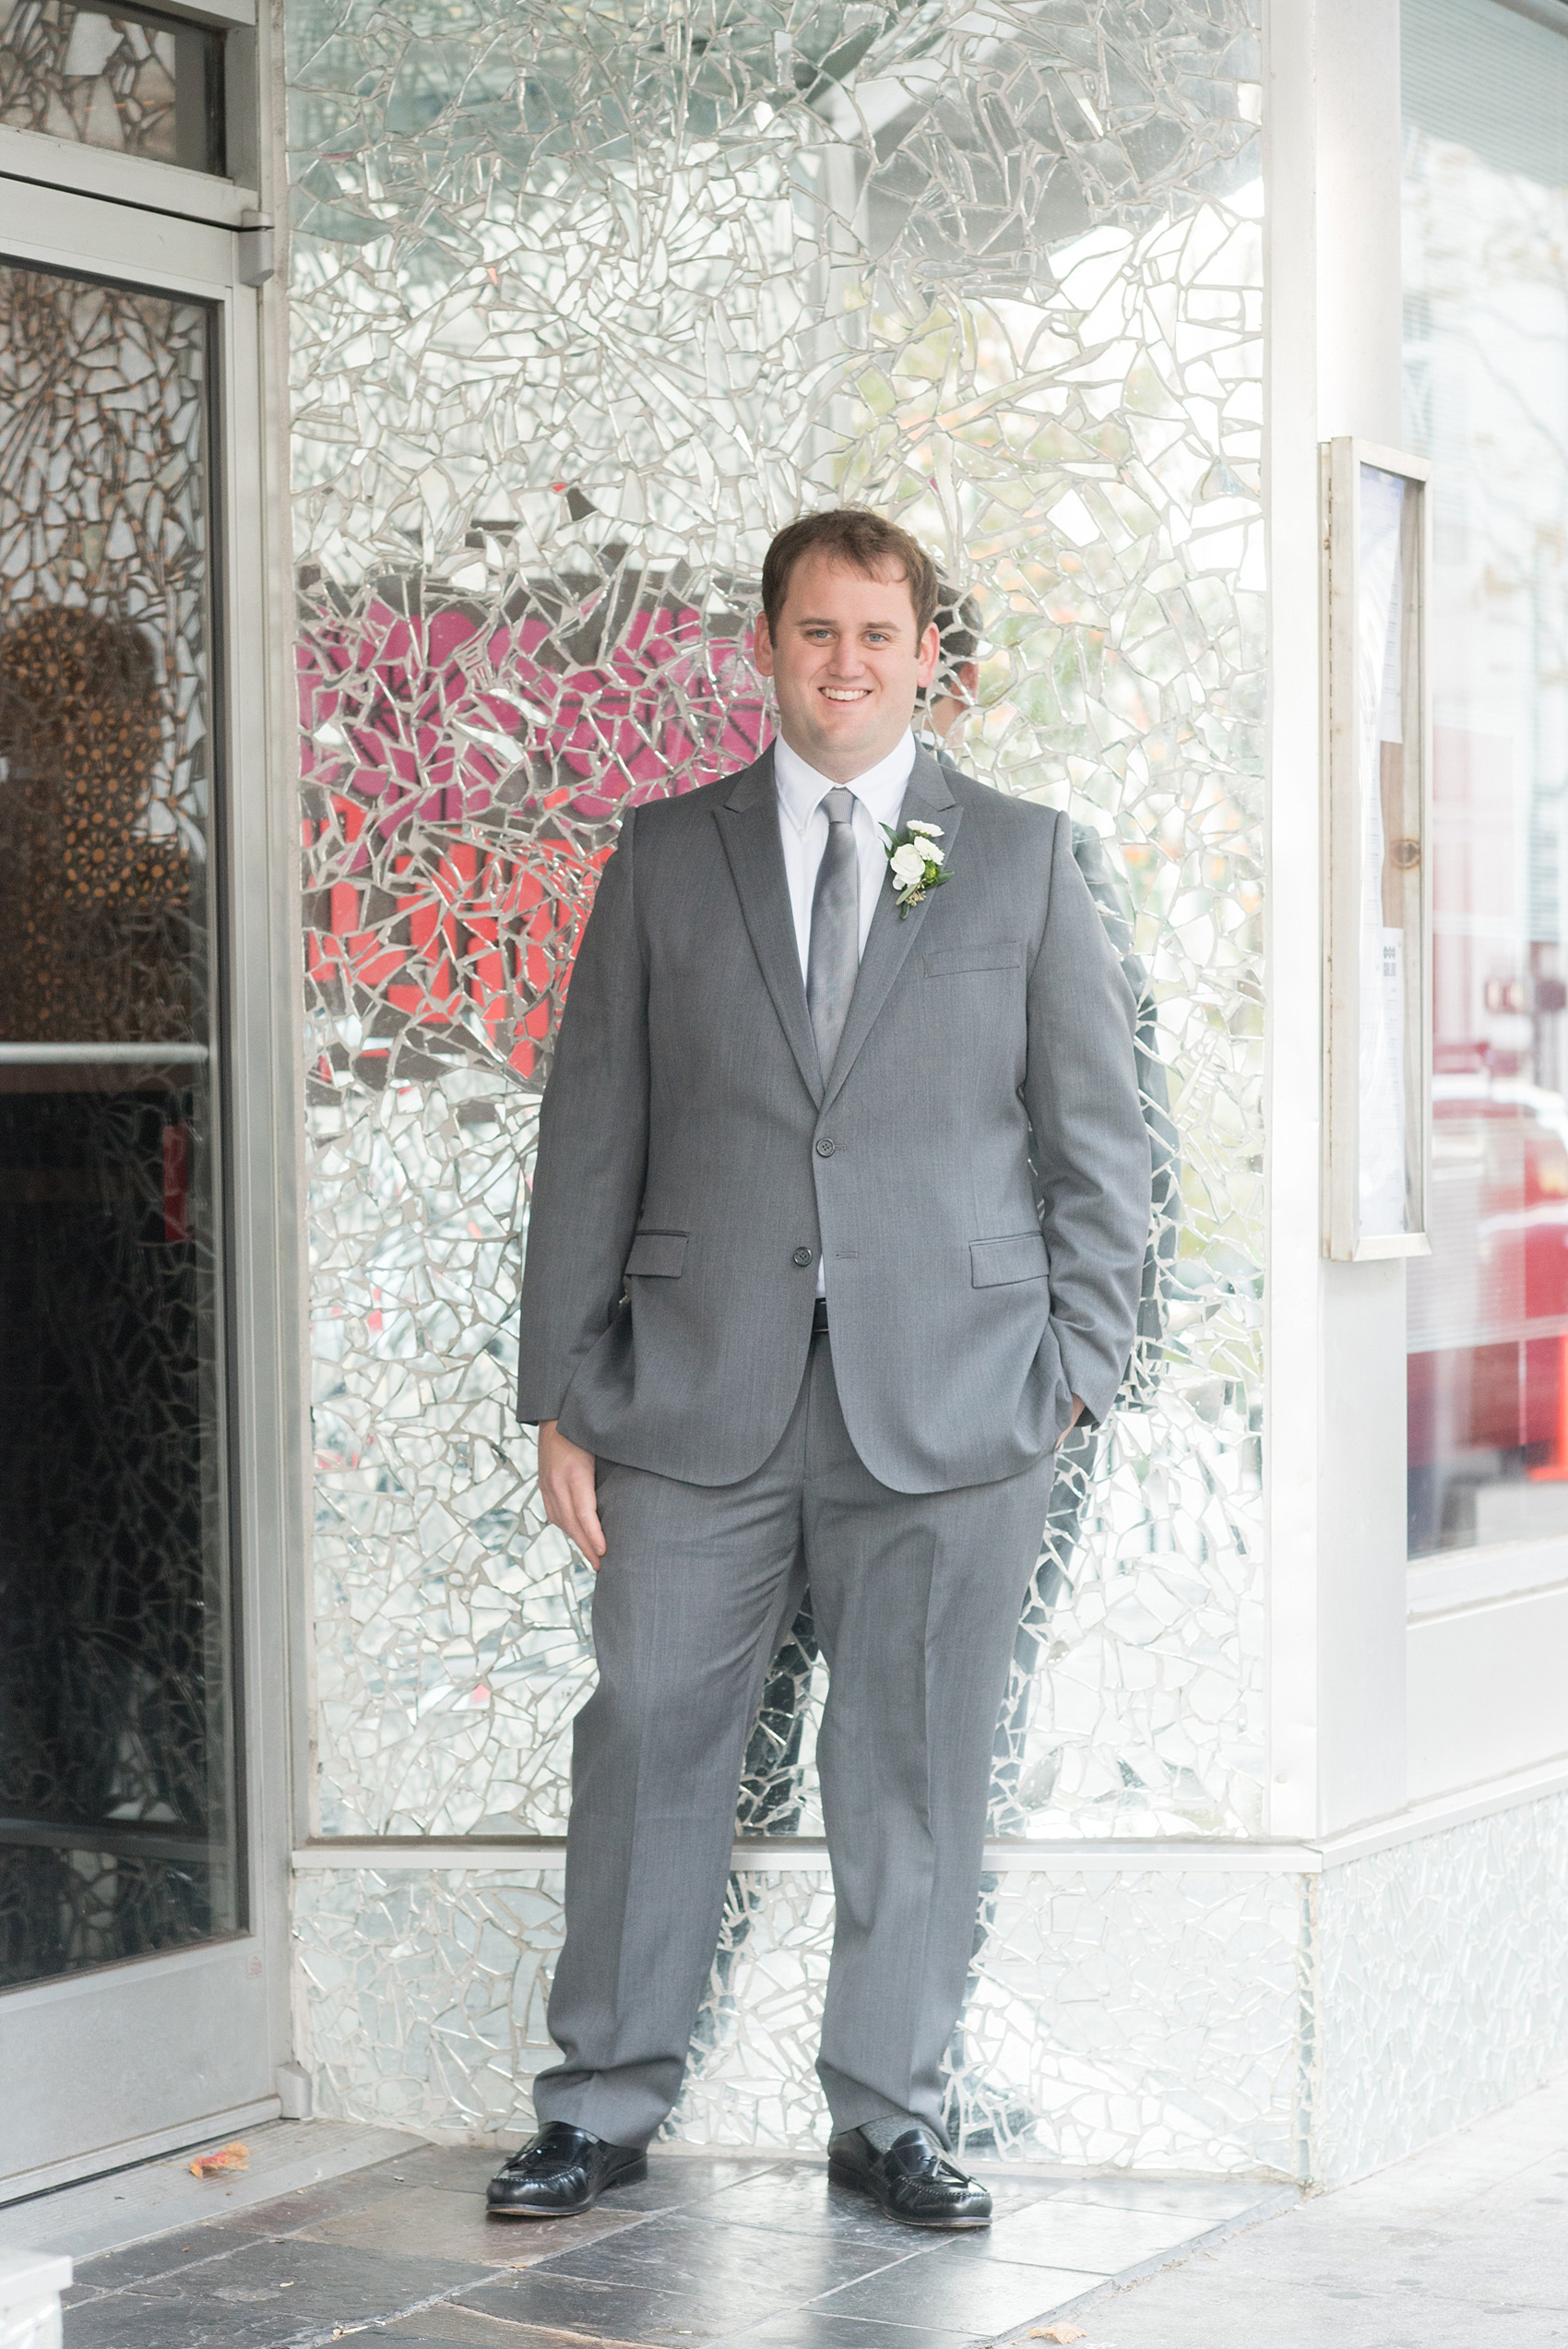 Mikkel Paige Photography photos from a fall wedding at The Stockroom at 230. A unique portrait picture of the groom against mosaic mirrors in downtown Raleigh.